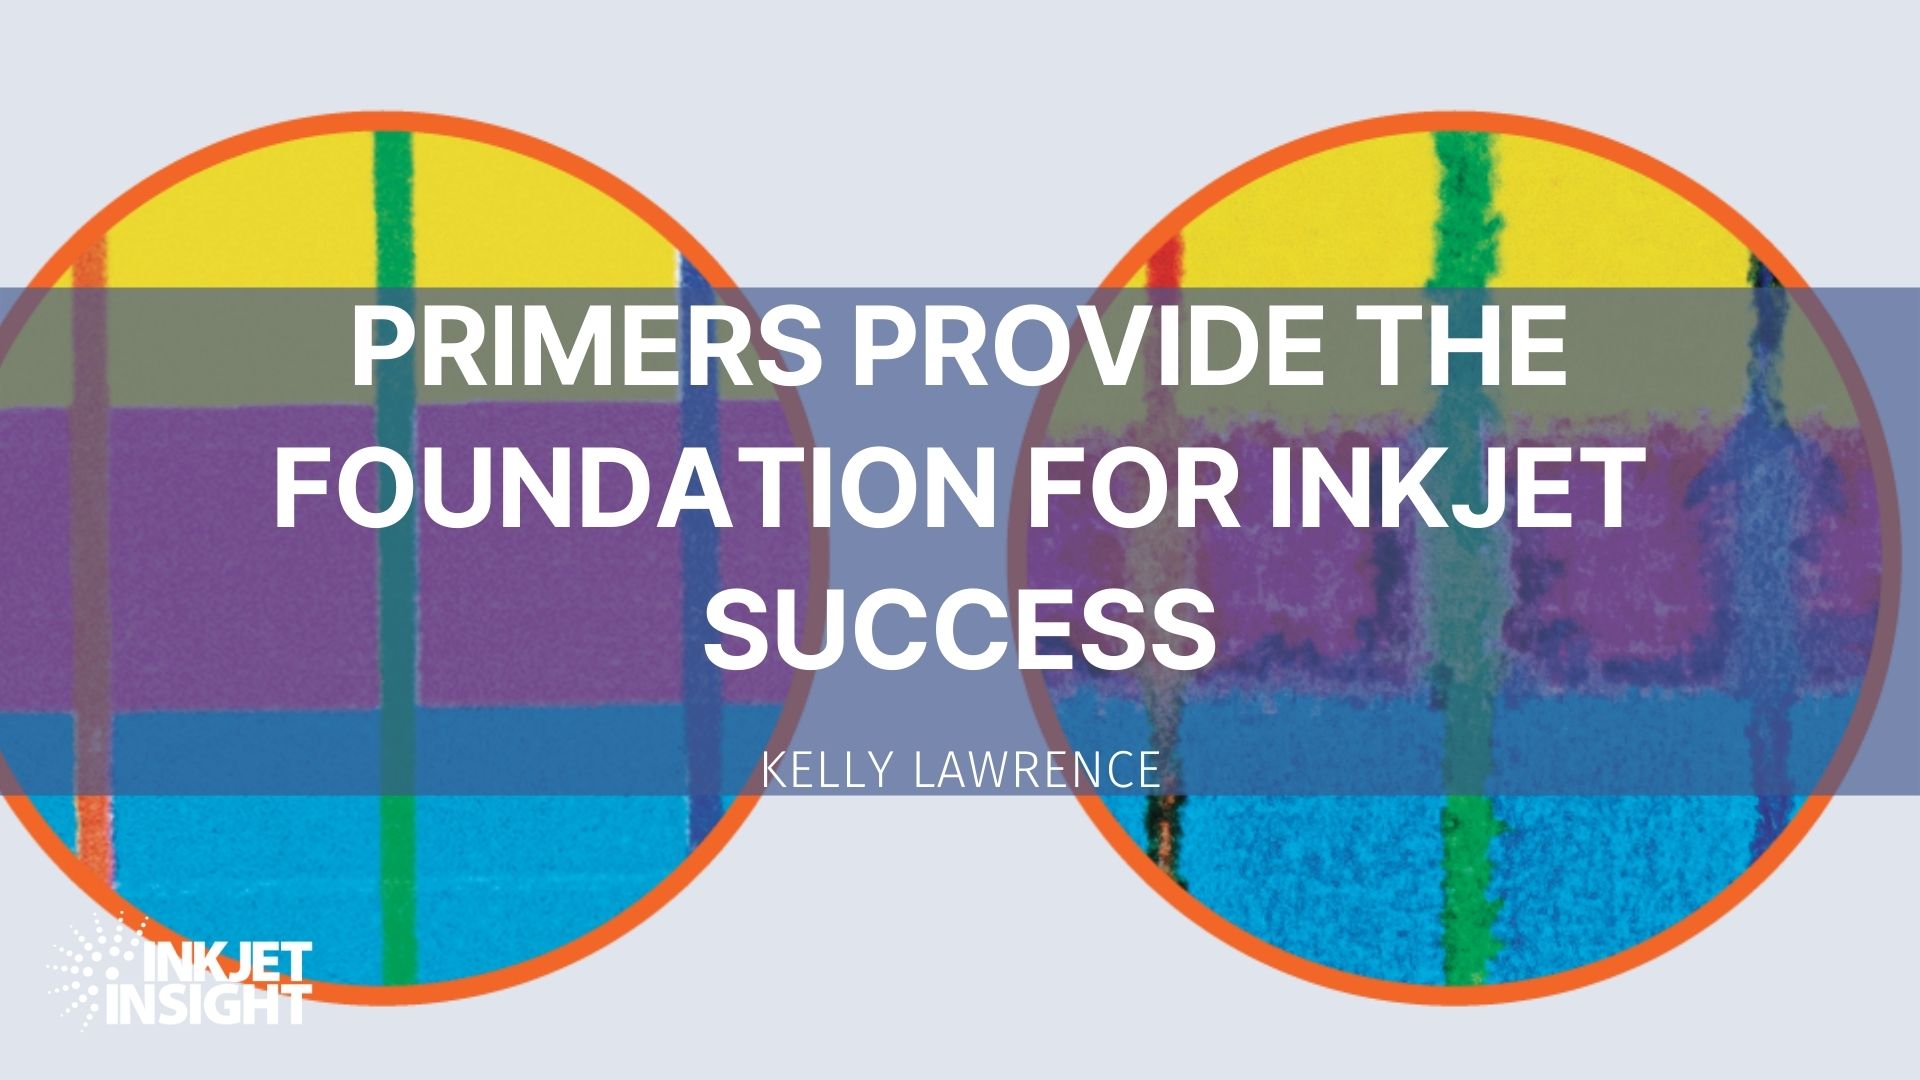 Featured image for “Primers Provide the Foundation for Inkjet Success”